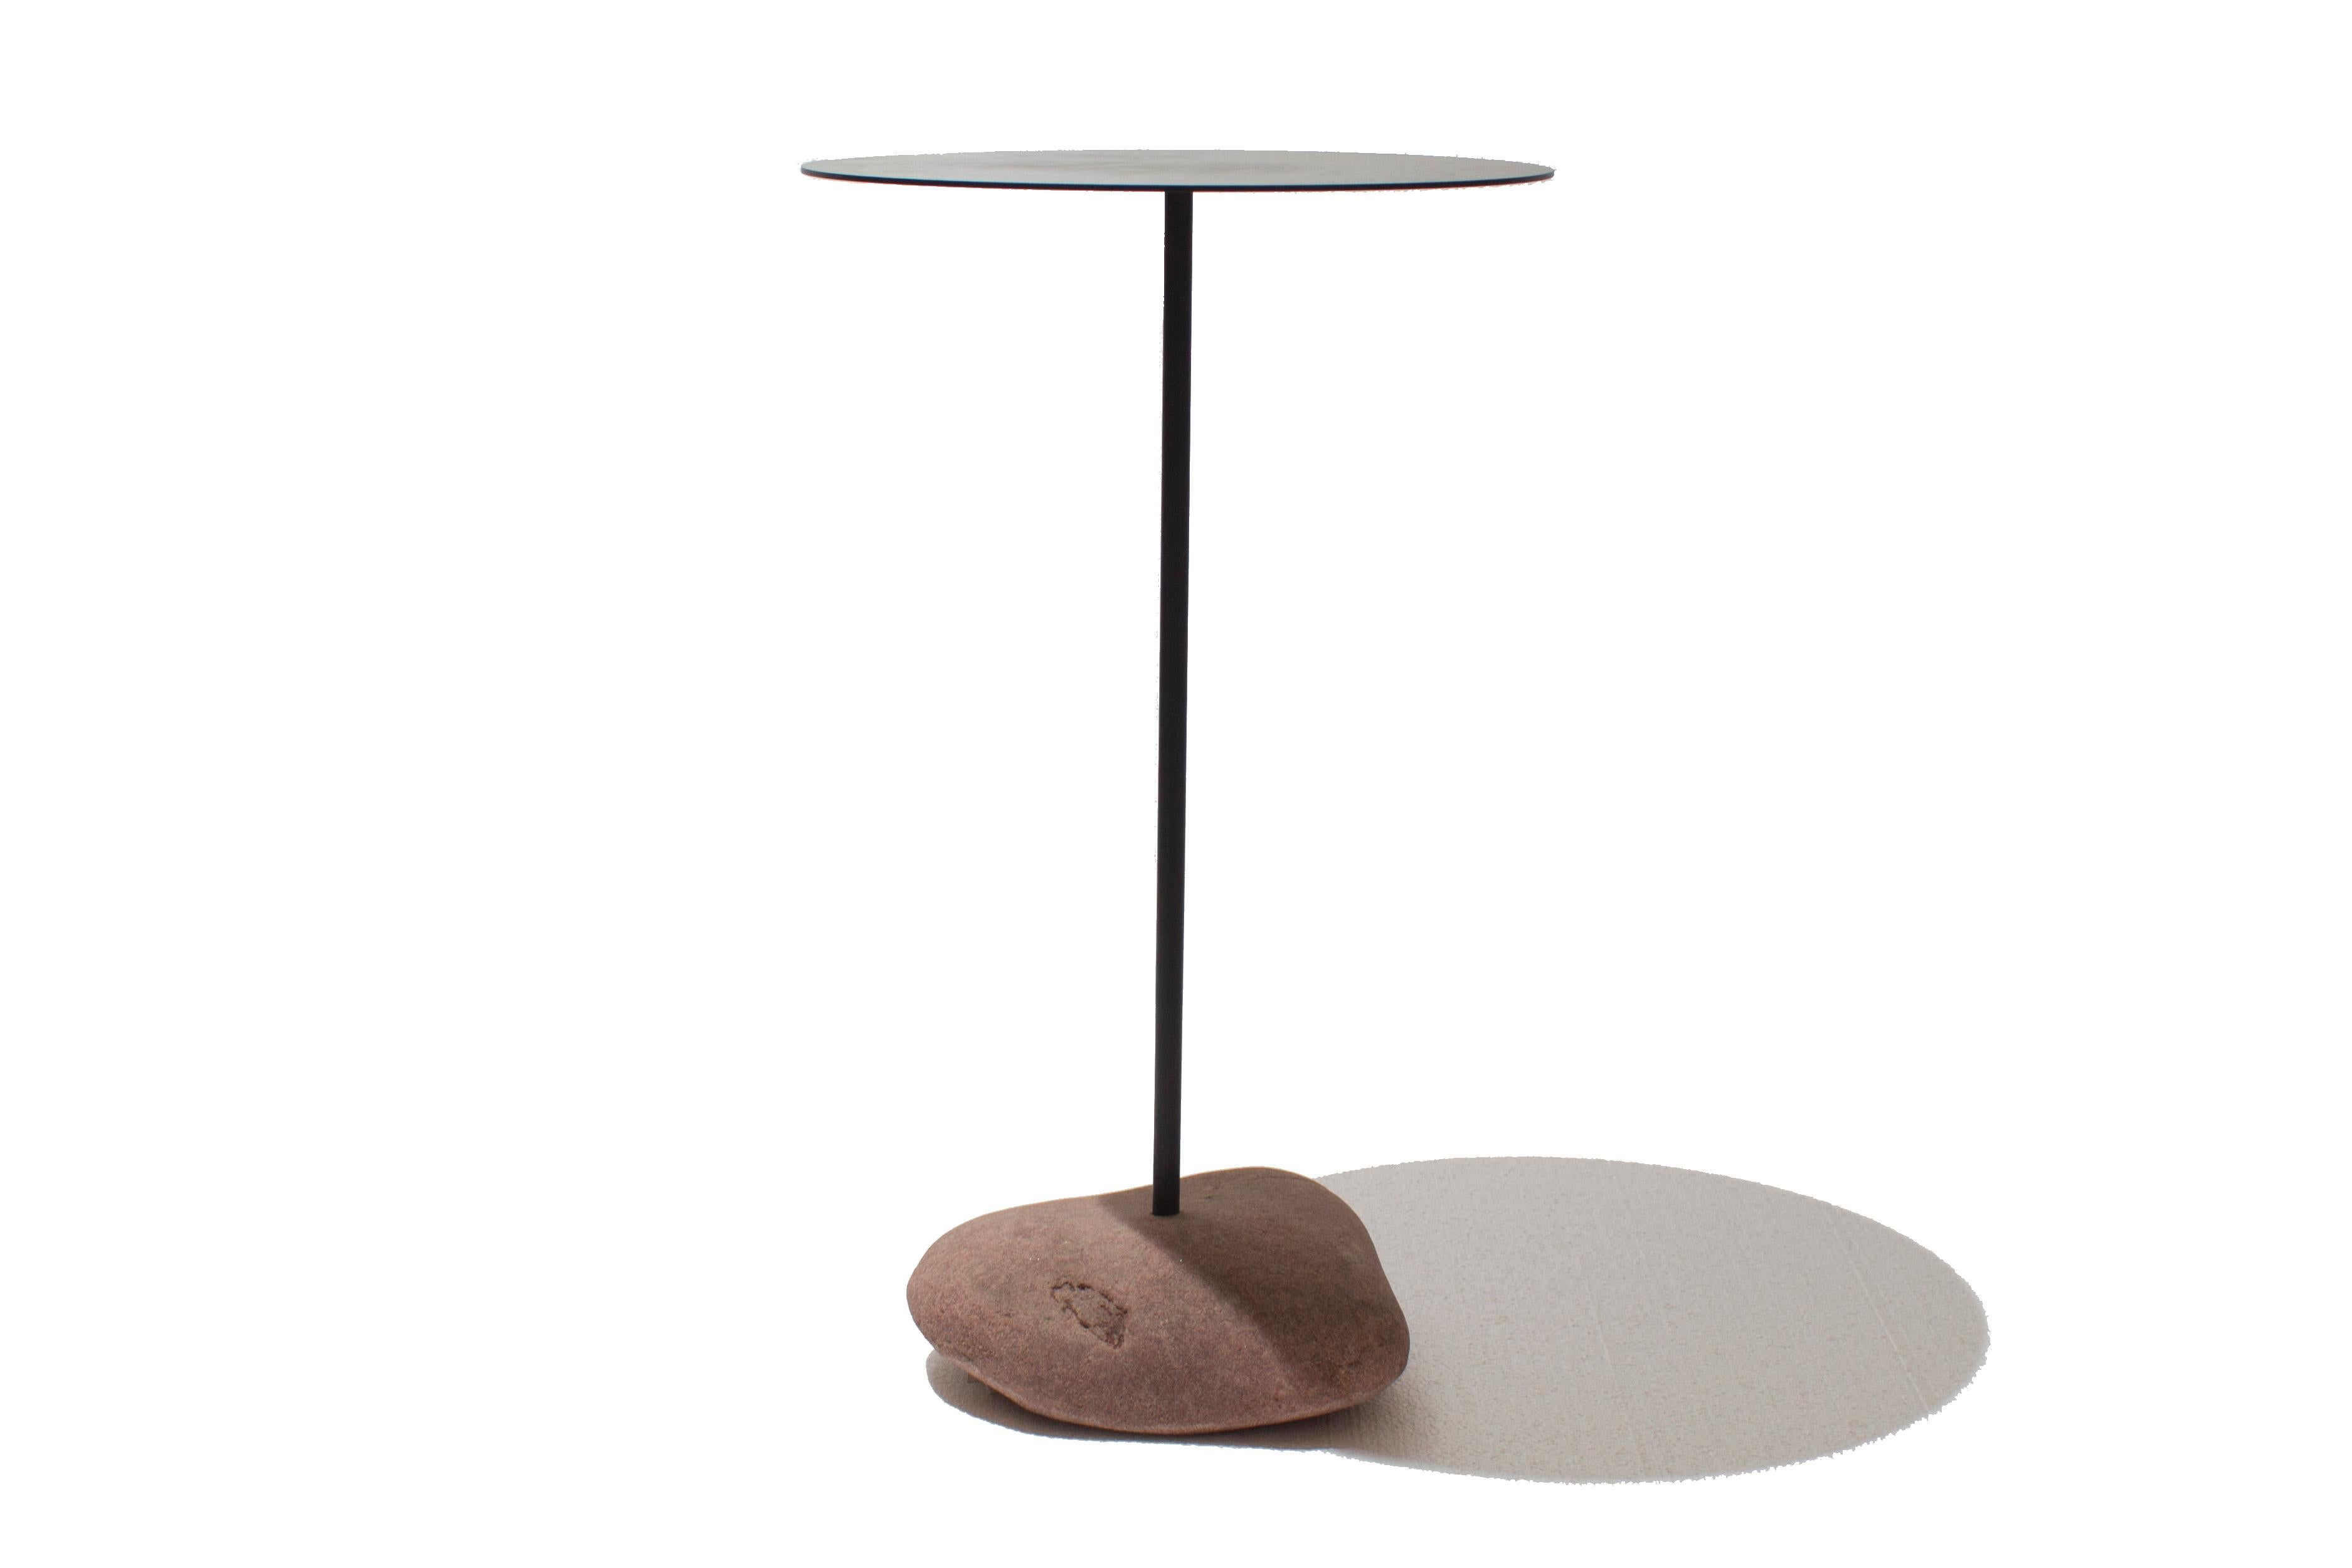 This new indoor/outdoor side table design is a take on minimal modern with earthy details. The juxtaposition of the natural stone with the matte black powder-coated steel top creates a balance in texture and warmth.

The Rocky Tabloa's strong stance